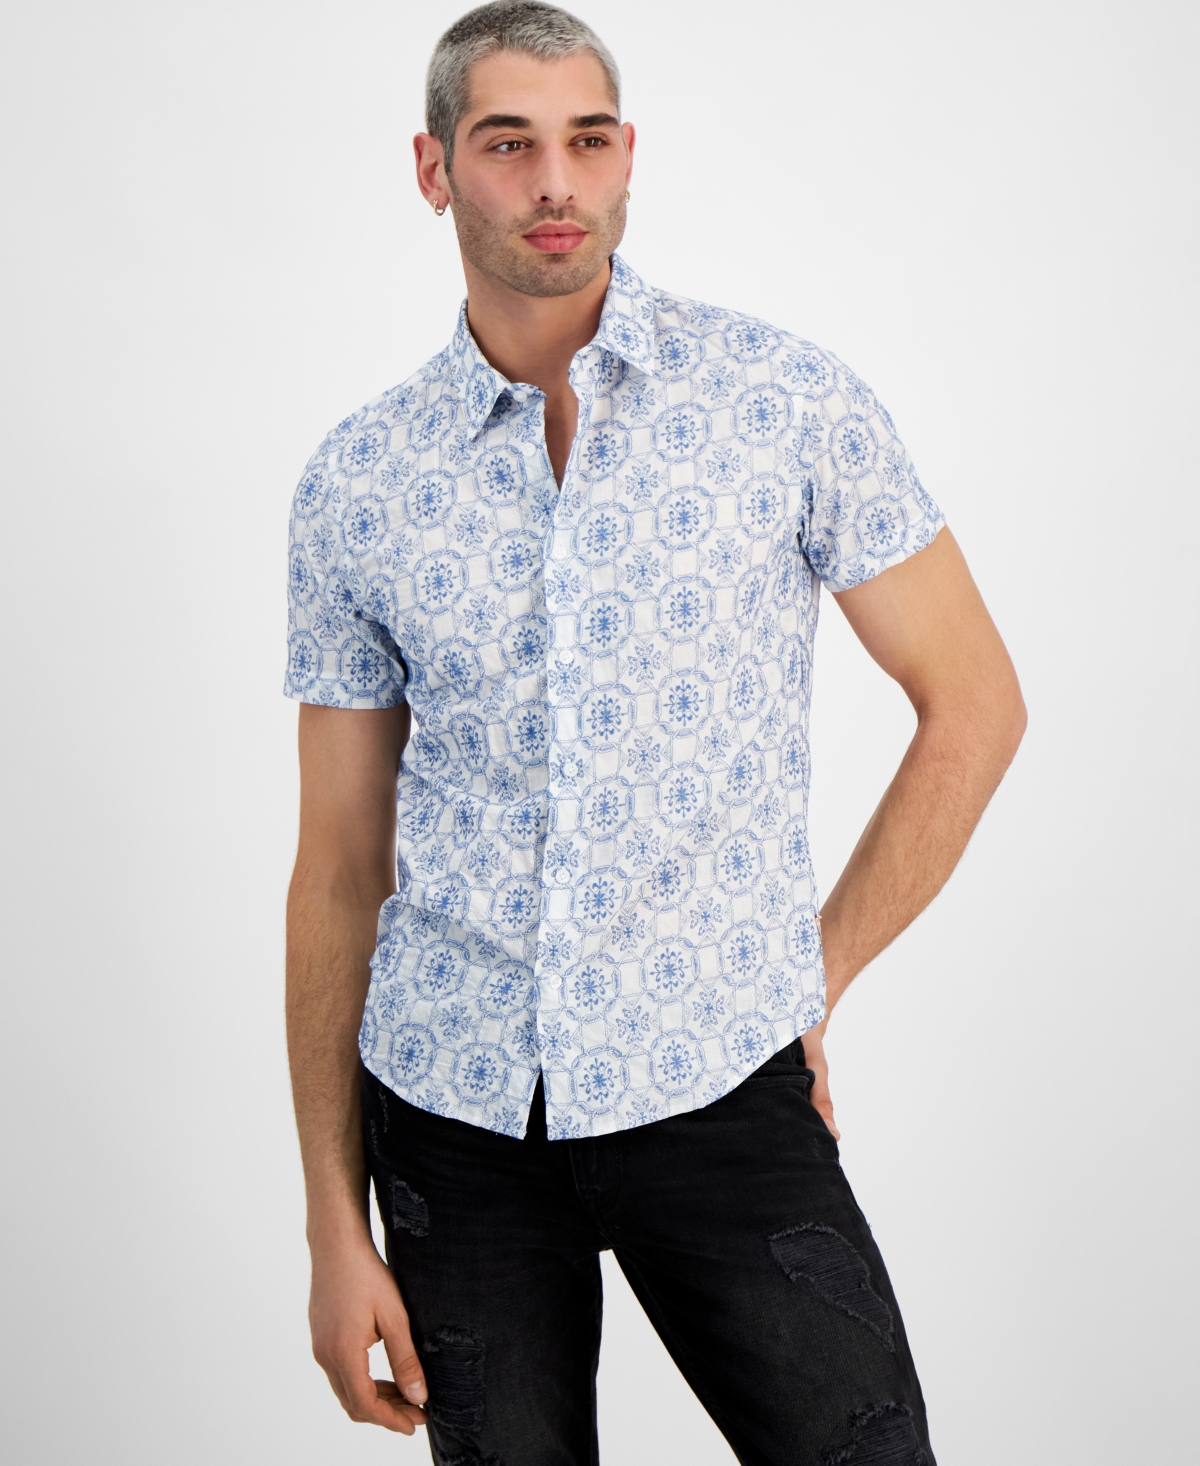 Guess Men's Regular-fit Mosaic Embroidery Shirt In Partly Cloudy Multi